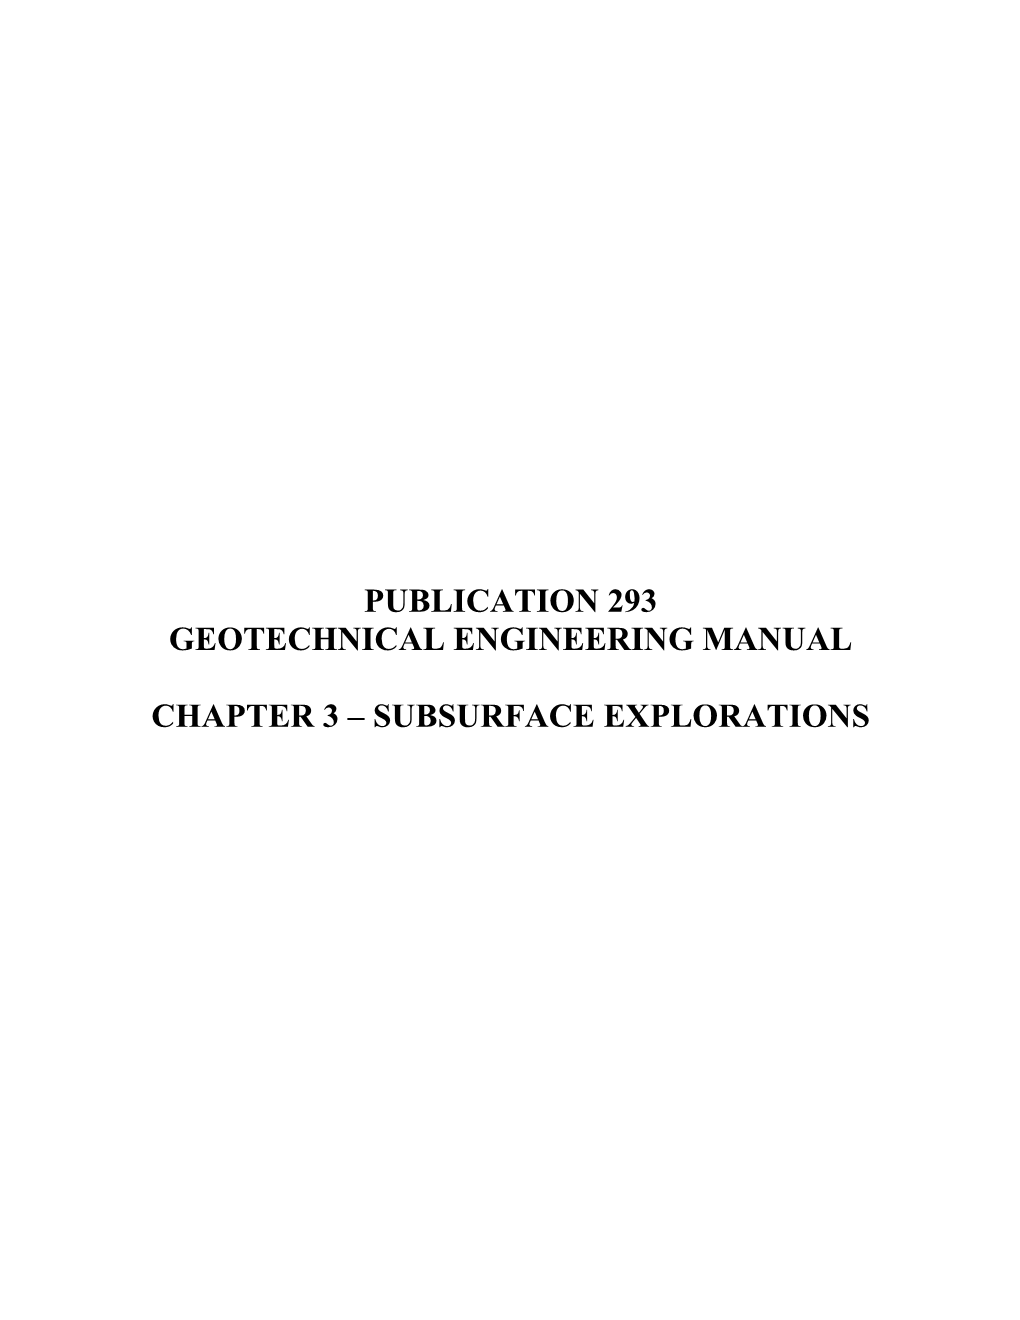 Publication 293 Geotechnical Engineering Manual